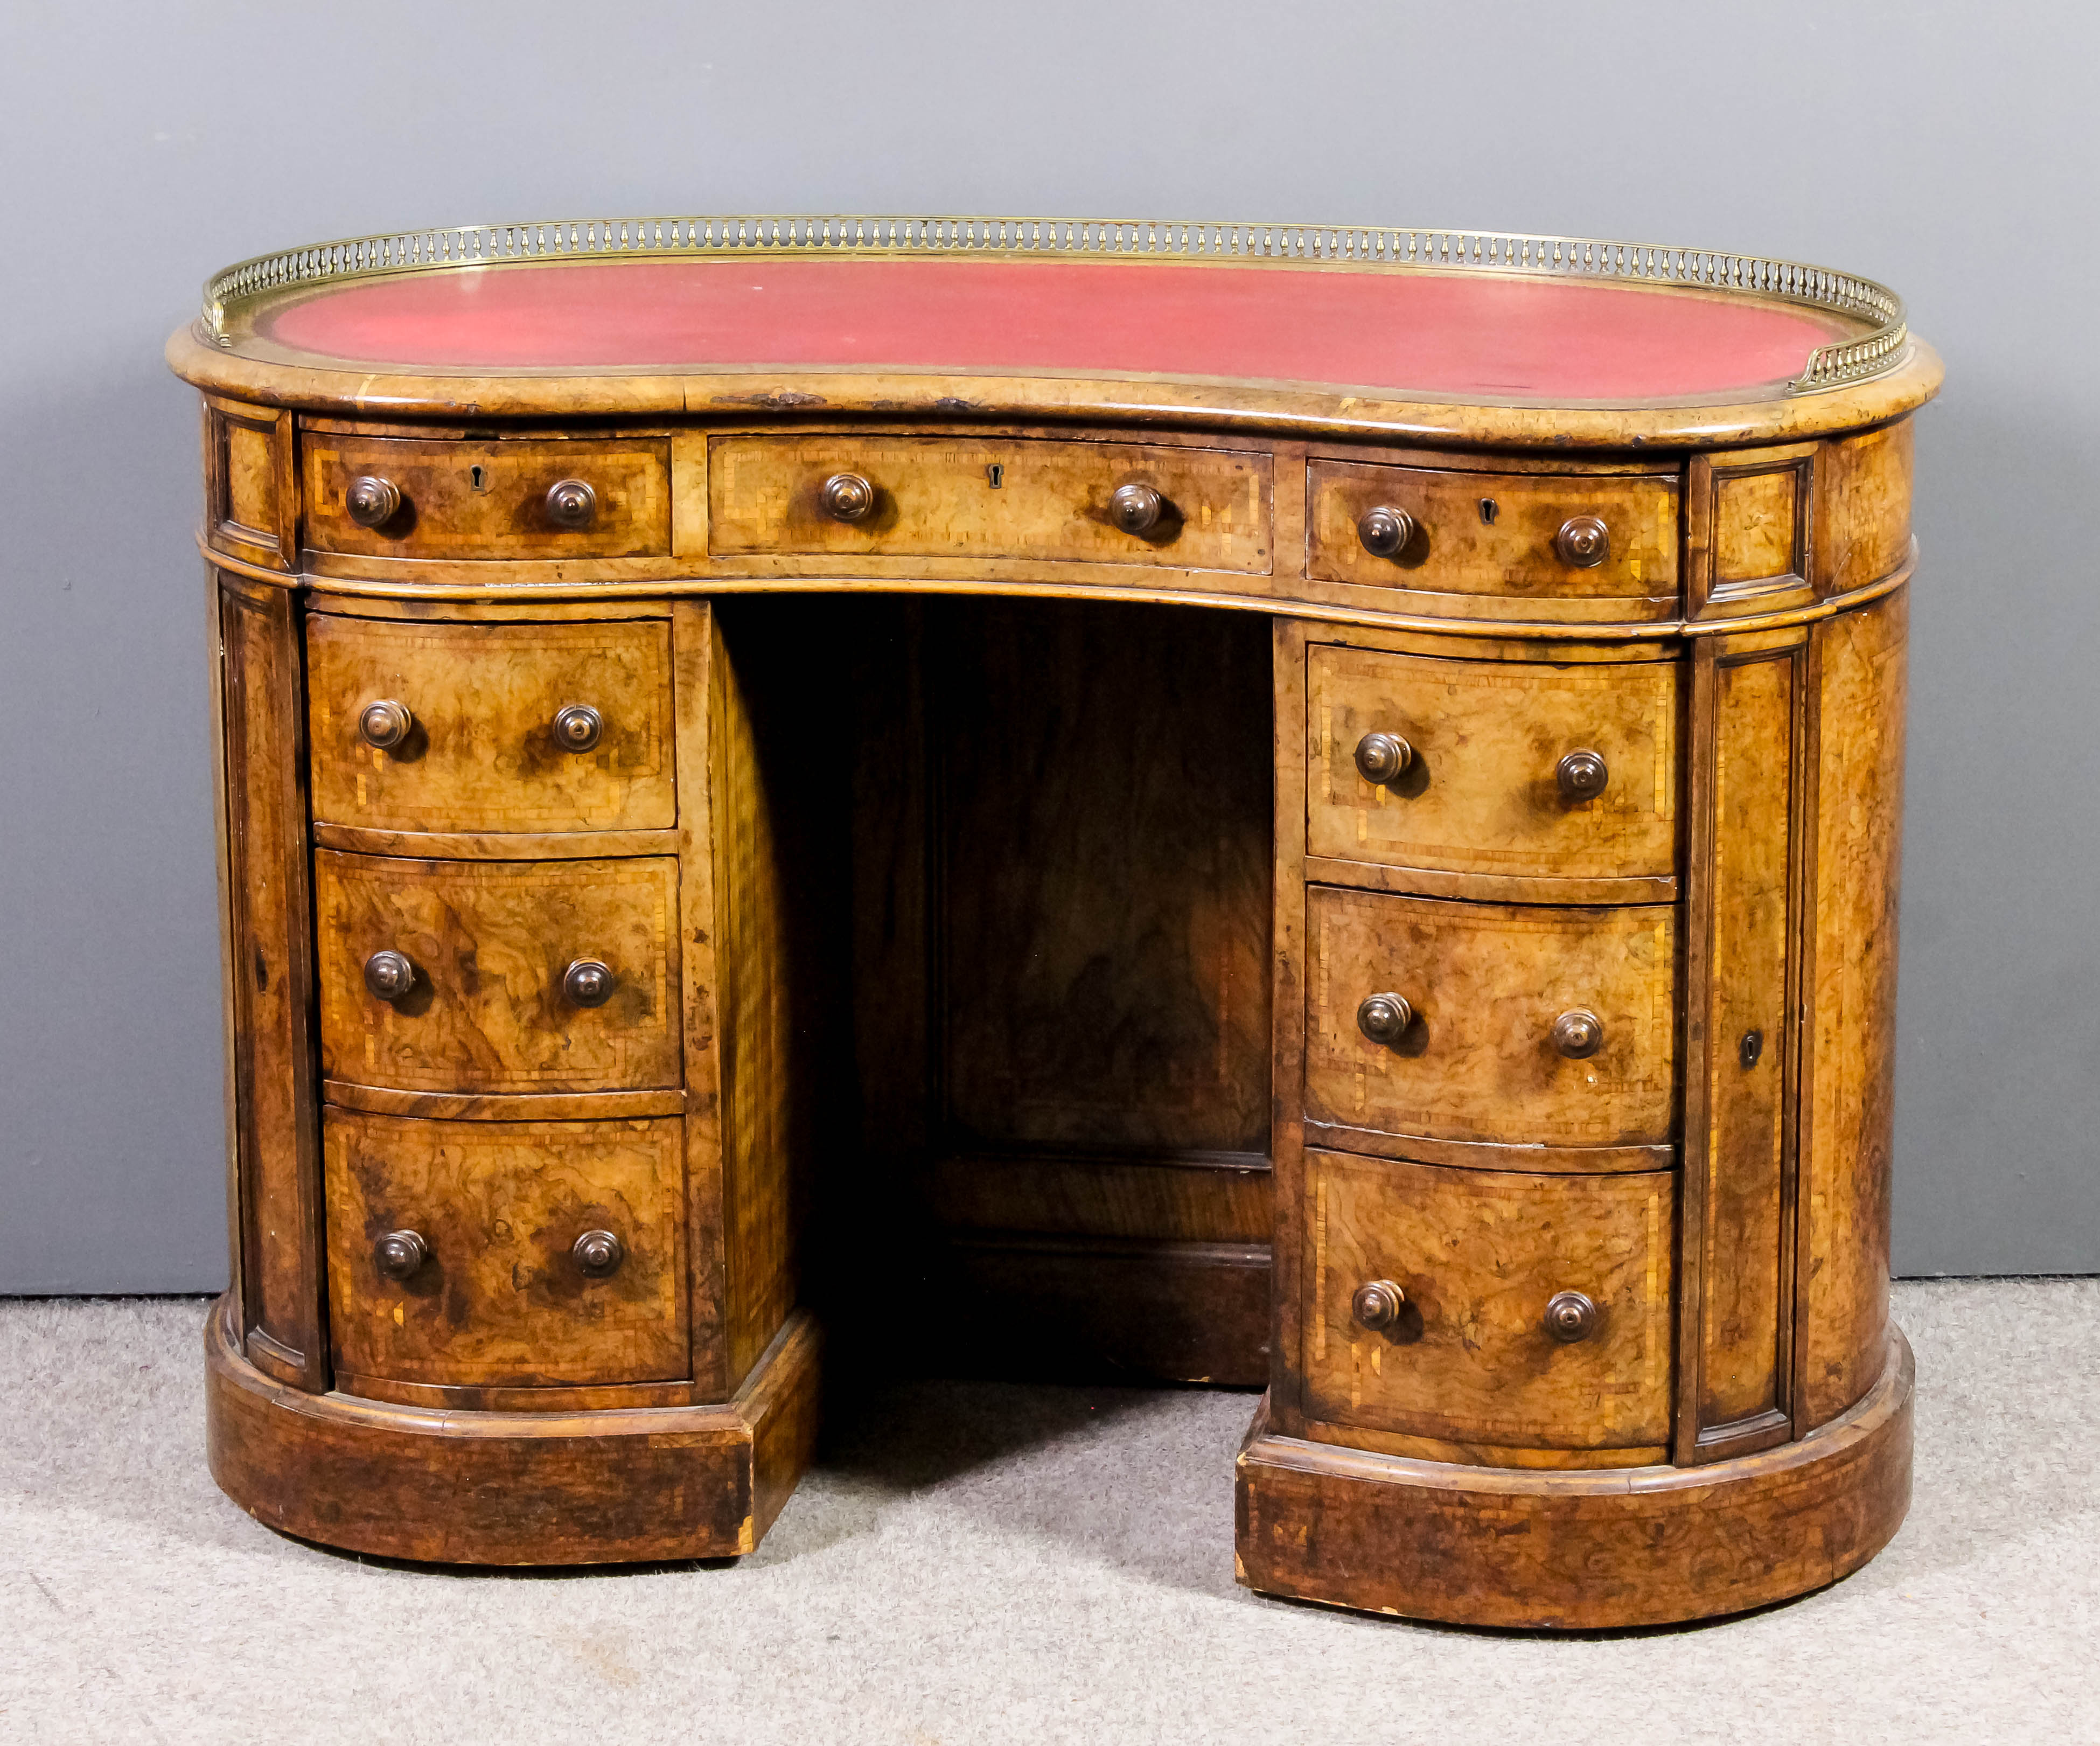 A Victorian lady's figured walnut kidney shaped kneehole desk with gilt brass gallery and red